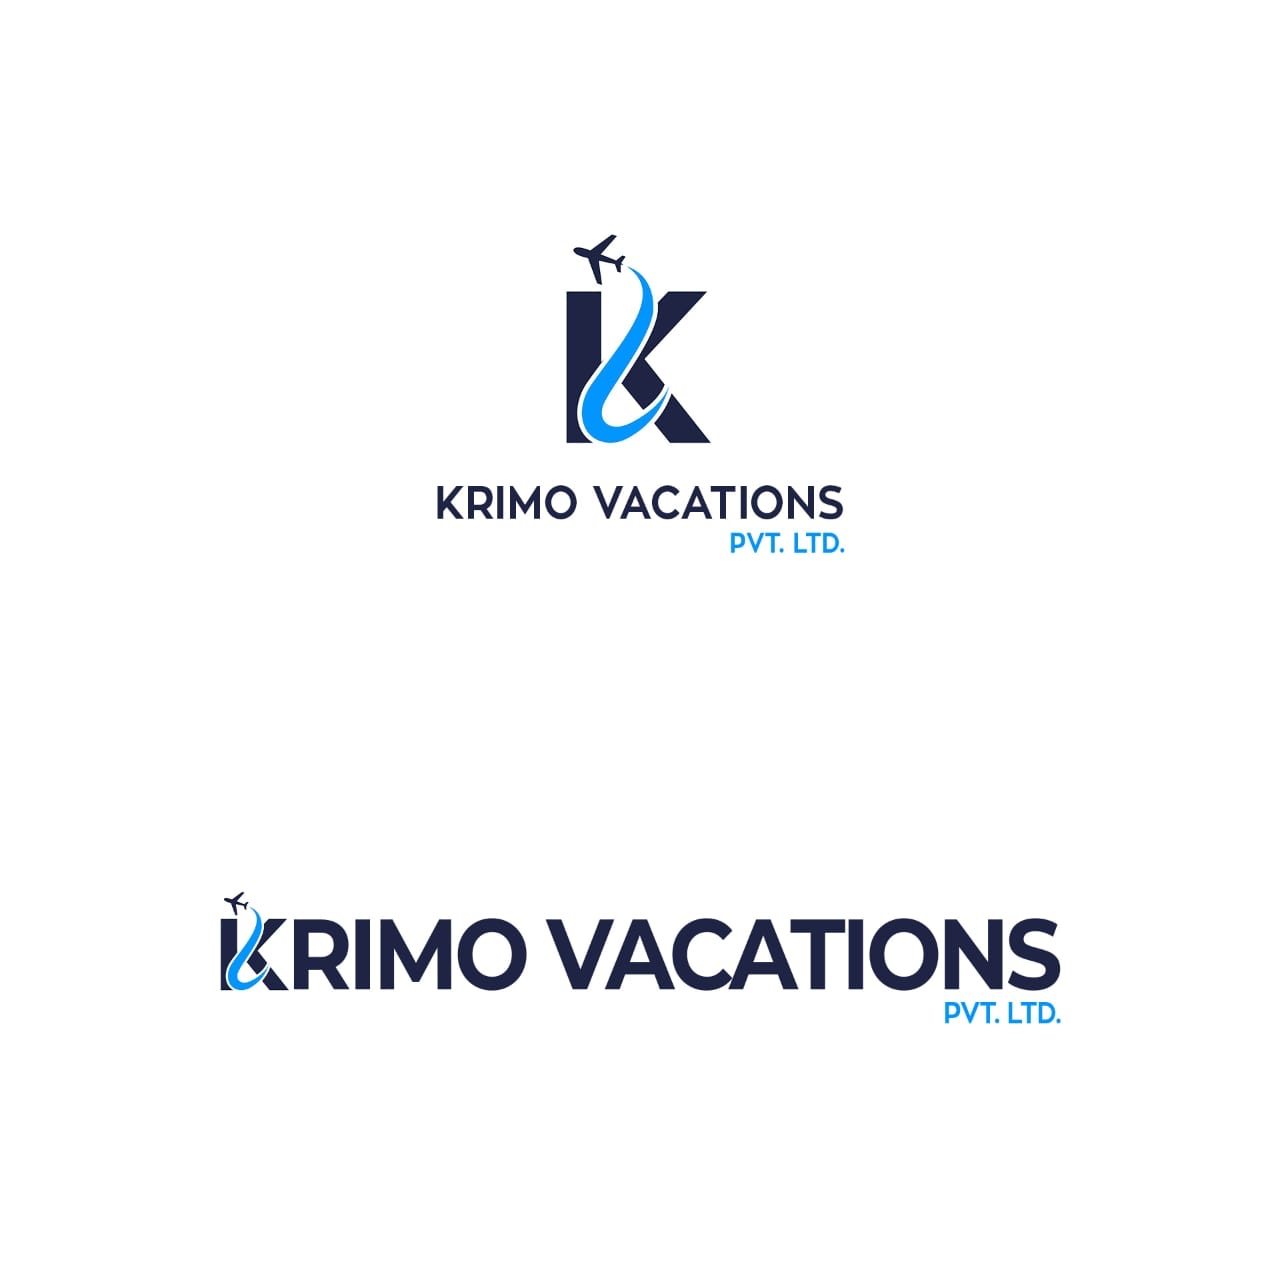 Krimo Vacations